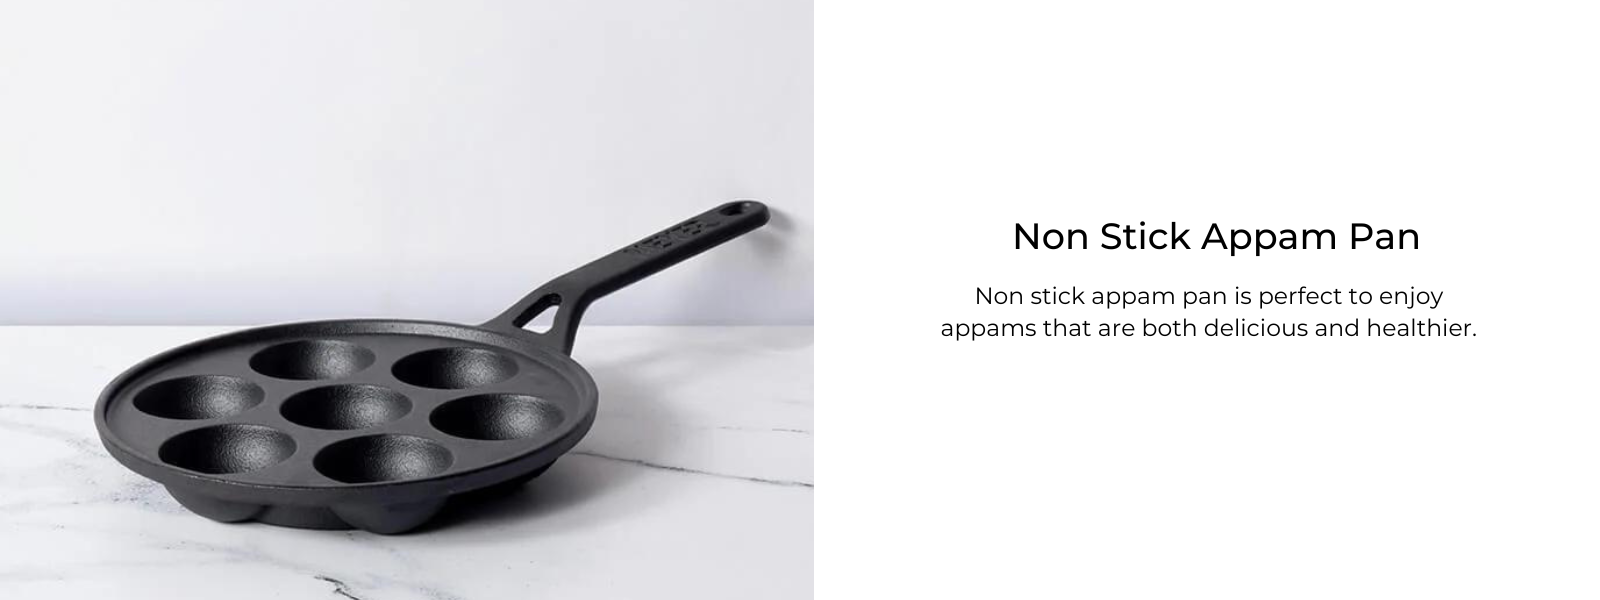 Non Stick Appam Pan for Minimal Oil Cooking